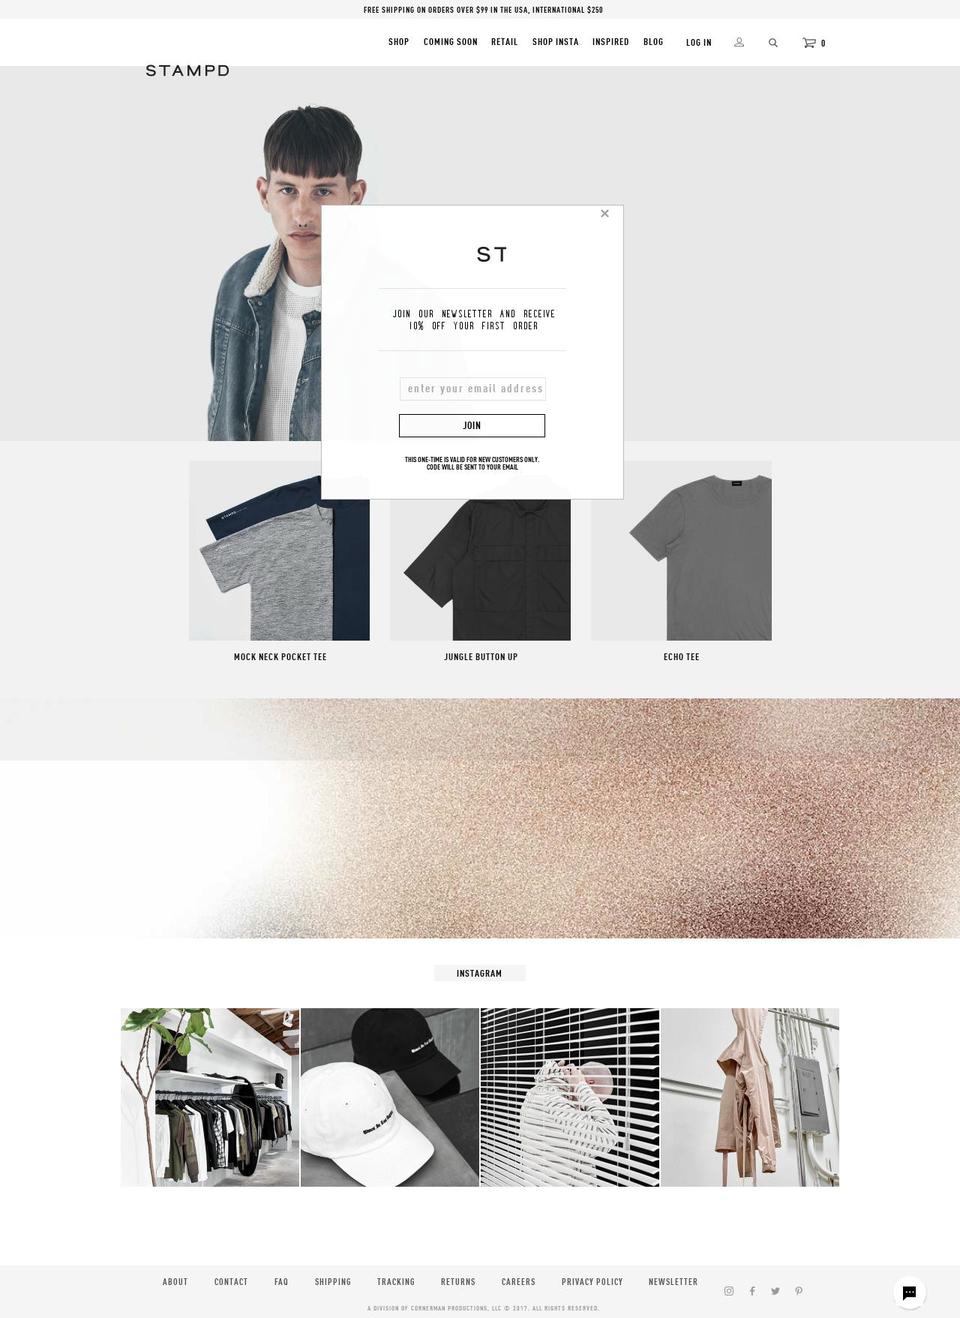 STAMPD - Fall One Shopify theme site example stampd.com